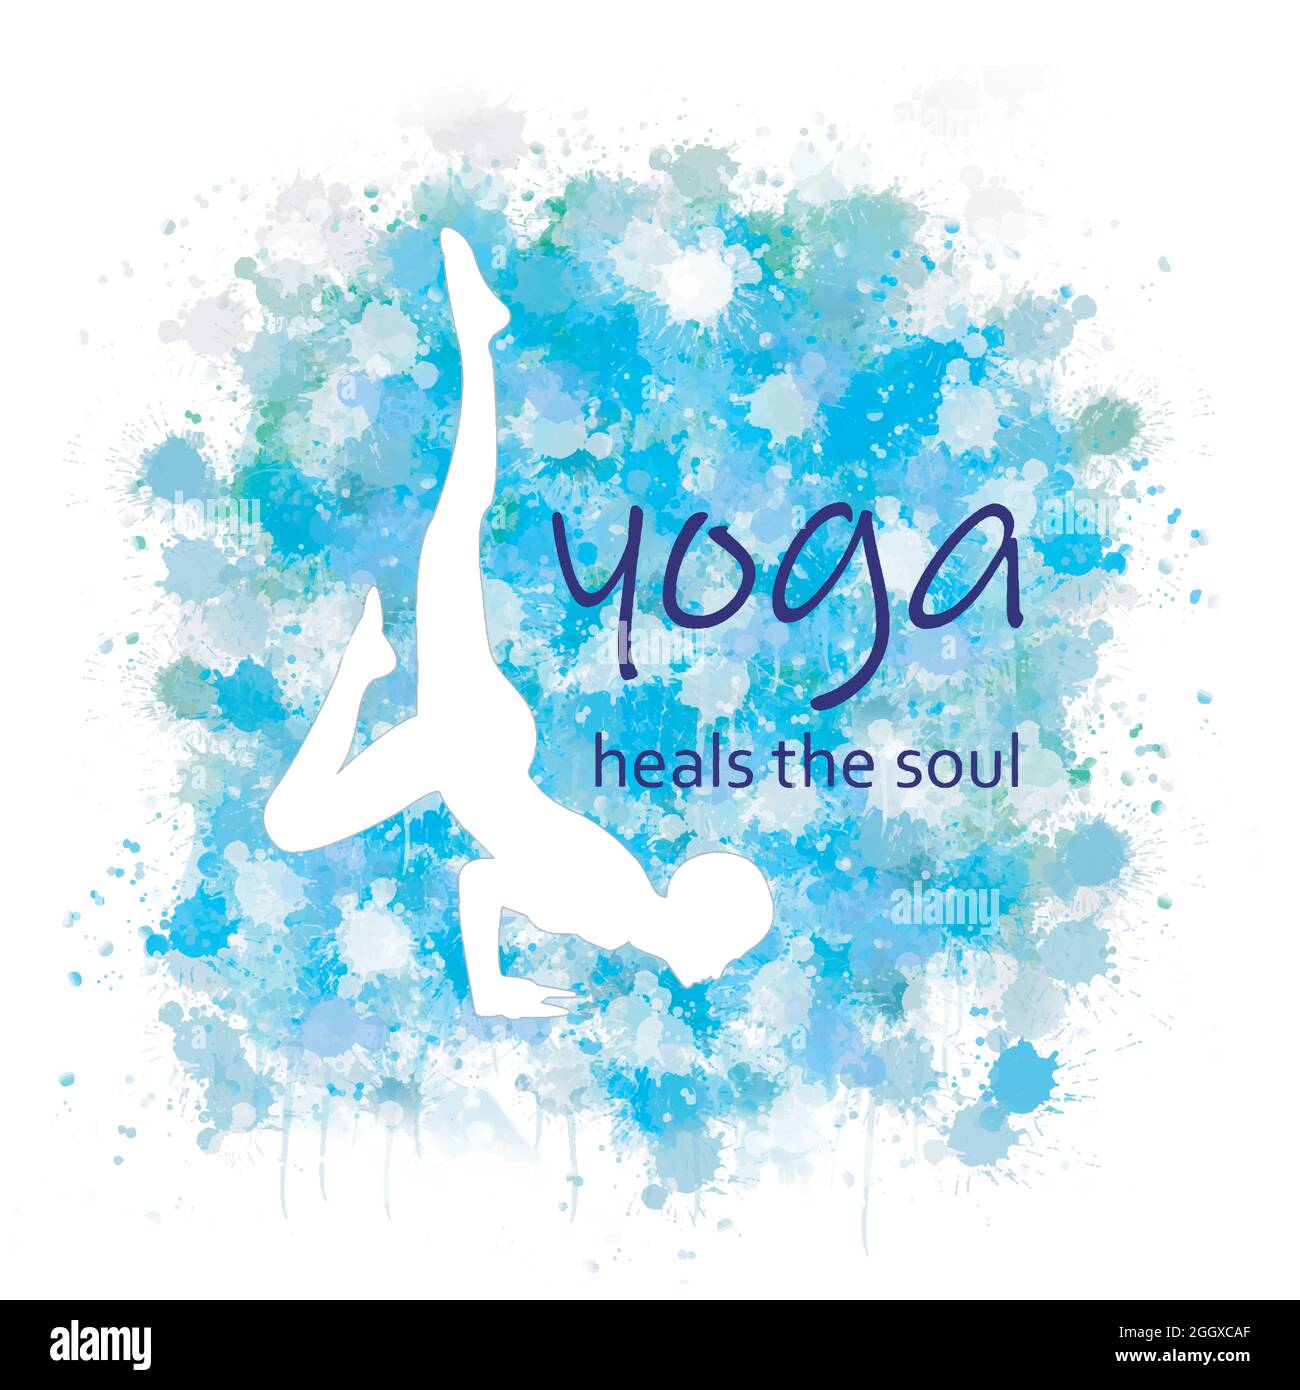 Sikhash Wall Sticker Posters, Yoga Poses Posters (18X12 inches) Yoga Asan  for Full Body, Workout, Mediation Quotes, Yoga Studio, Hall, Big Size. Q27  : Amazon.in: Home & Kitchen